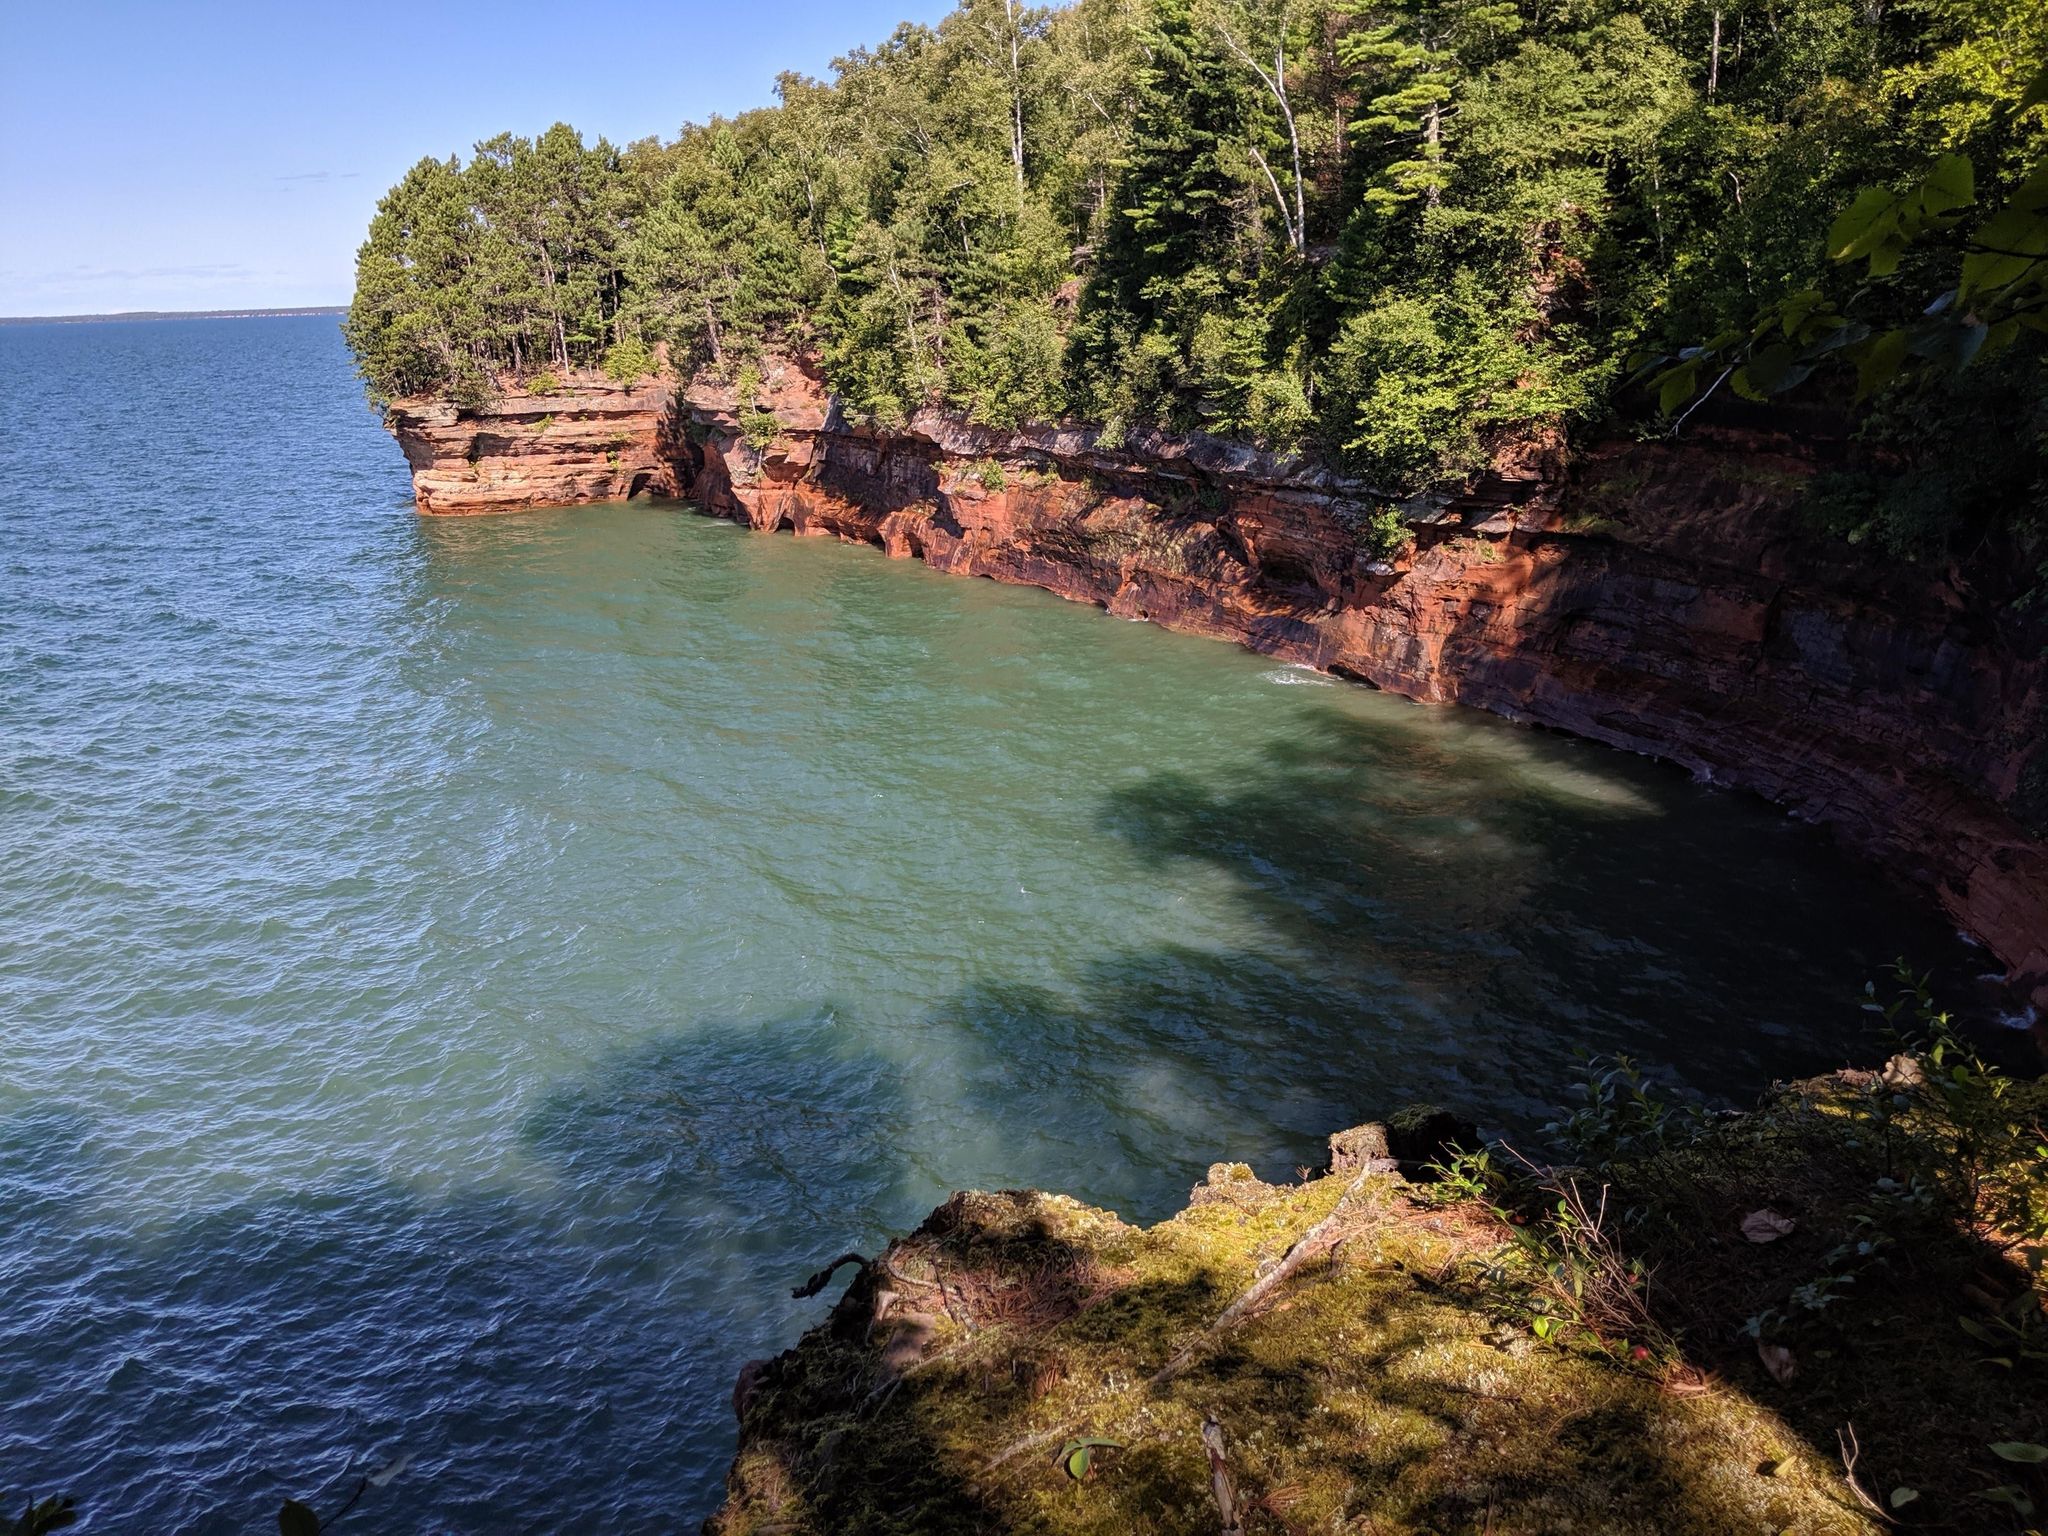 Hike or paddle to views of the sea caves along the mainland unit of the park.